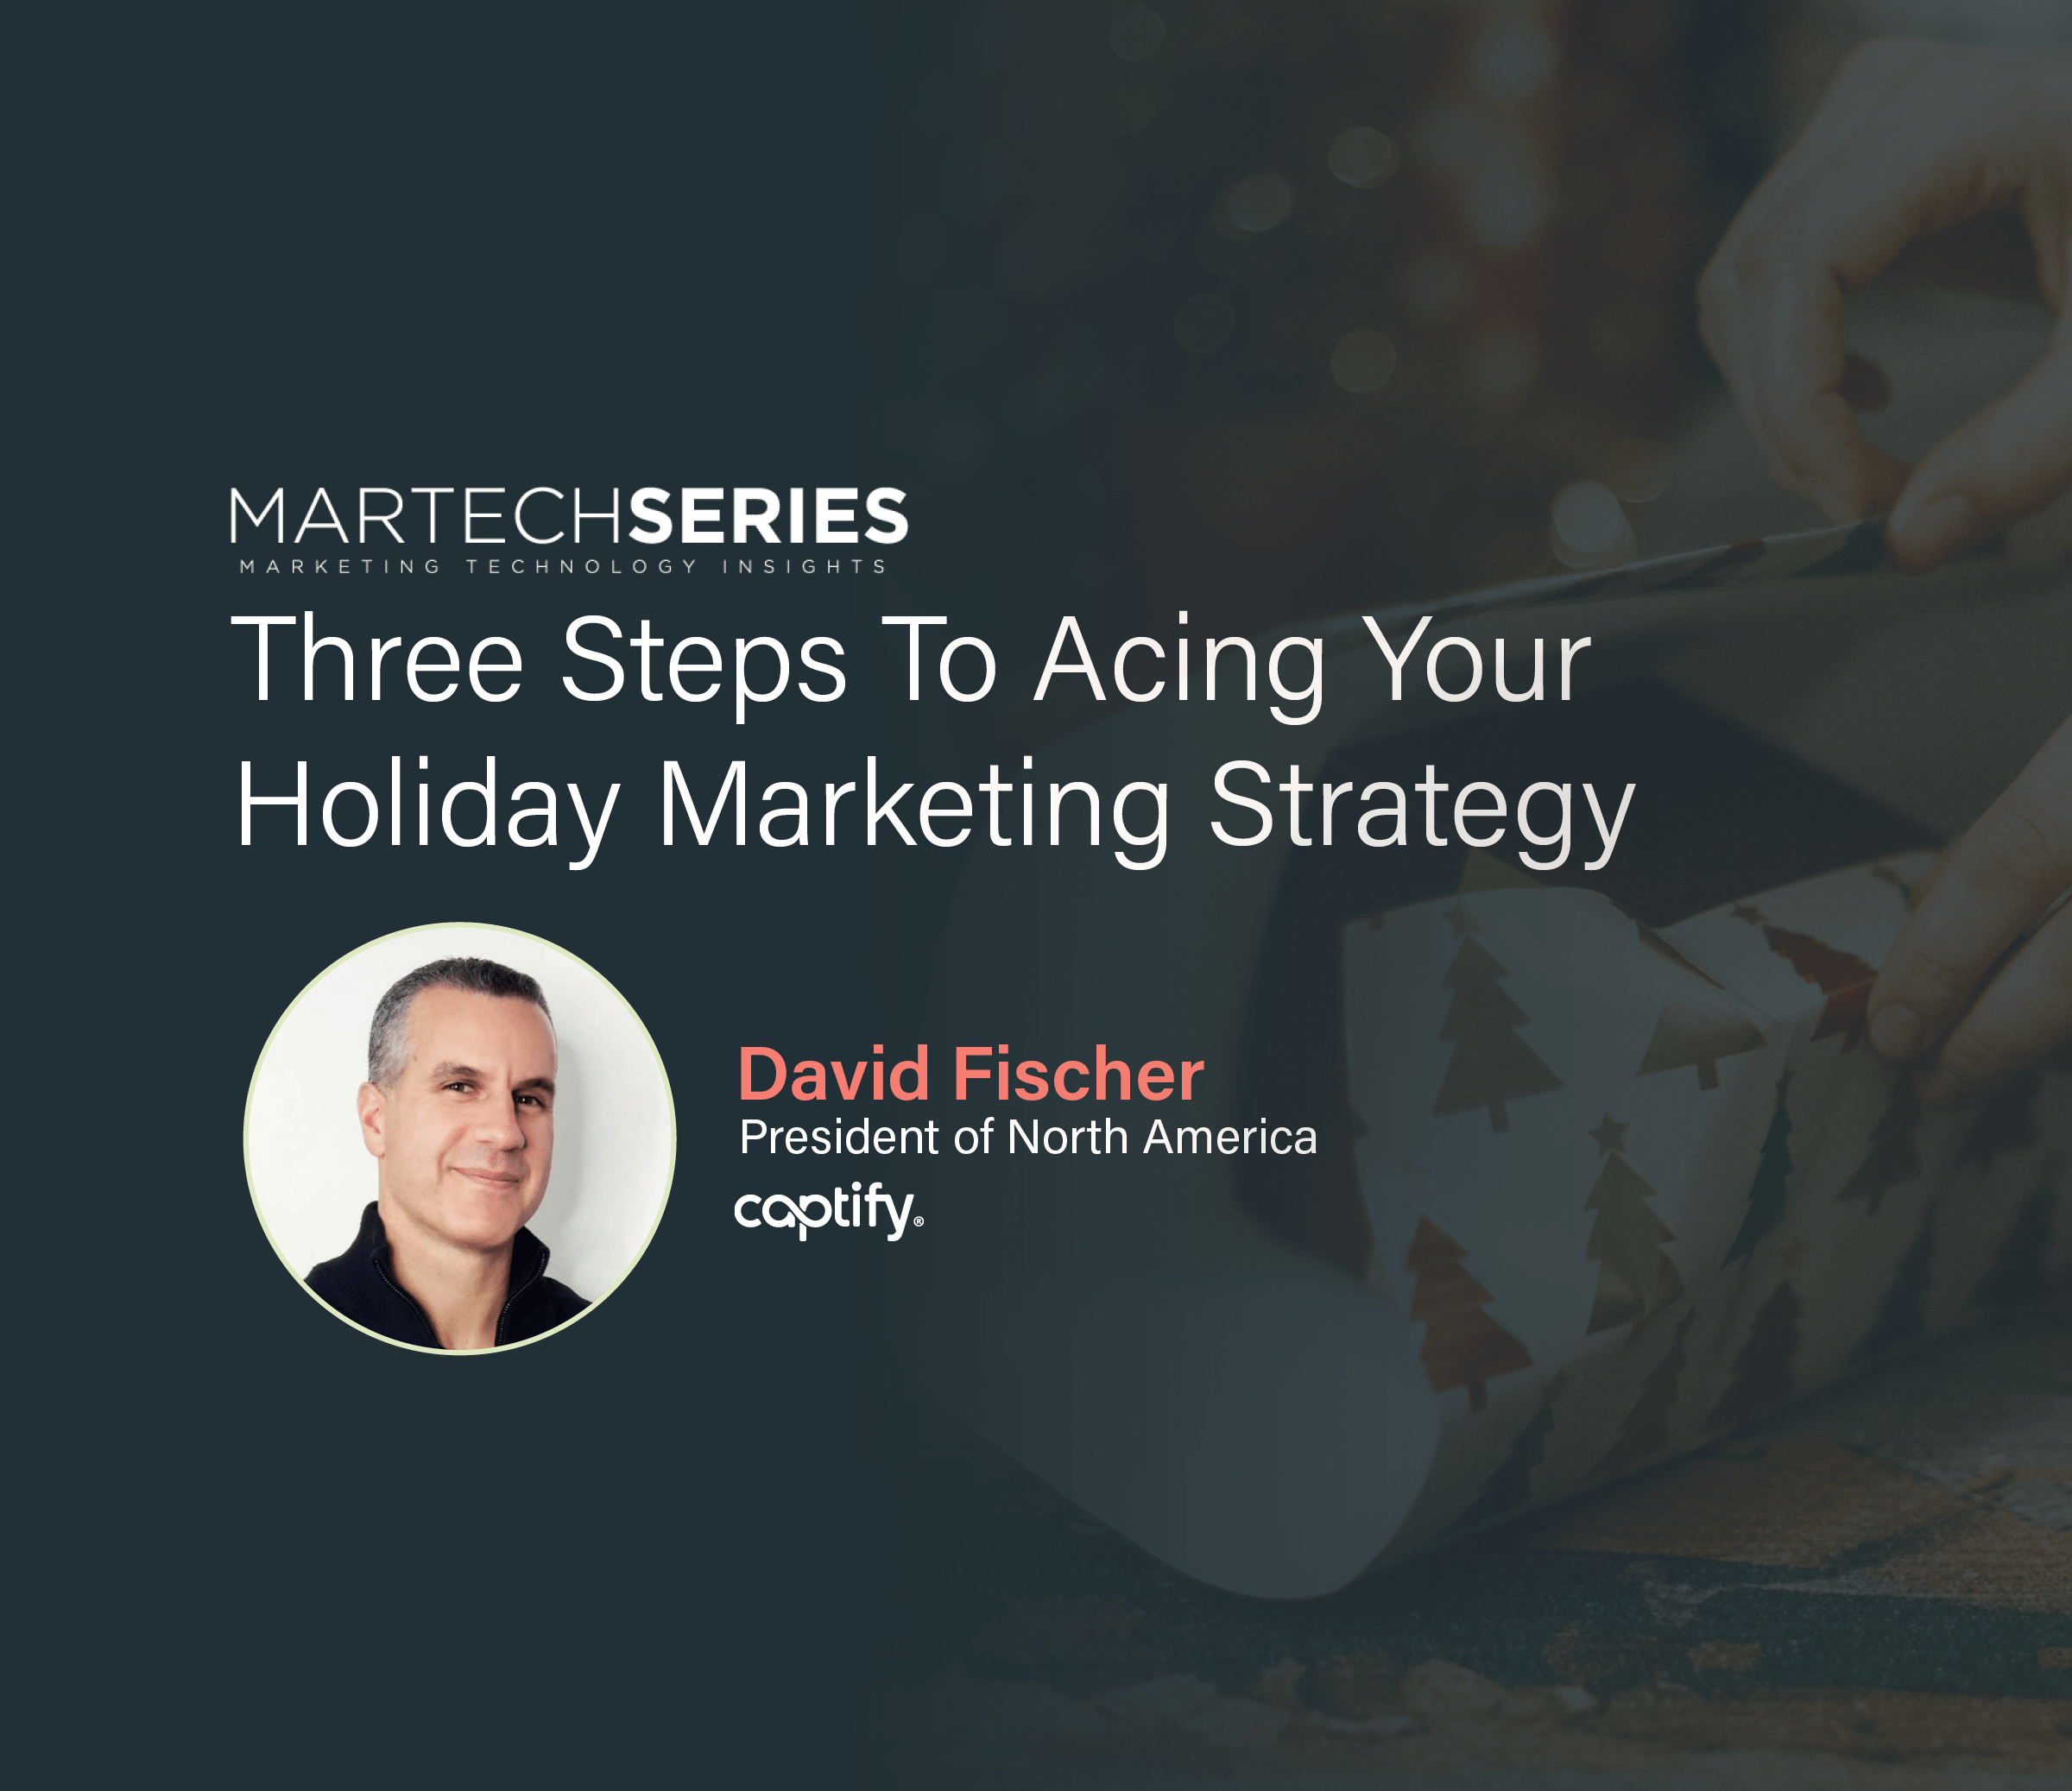 Martech Series: Captify’s David Fischer—Three Steps To Acing Your Holiday Marketing Strategy